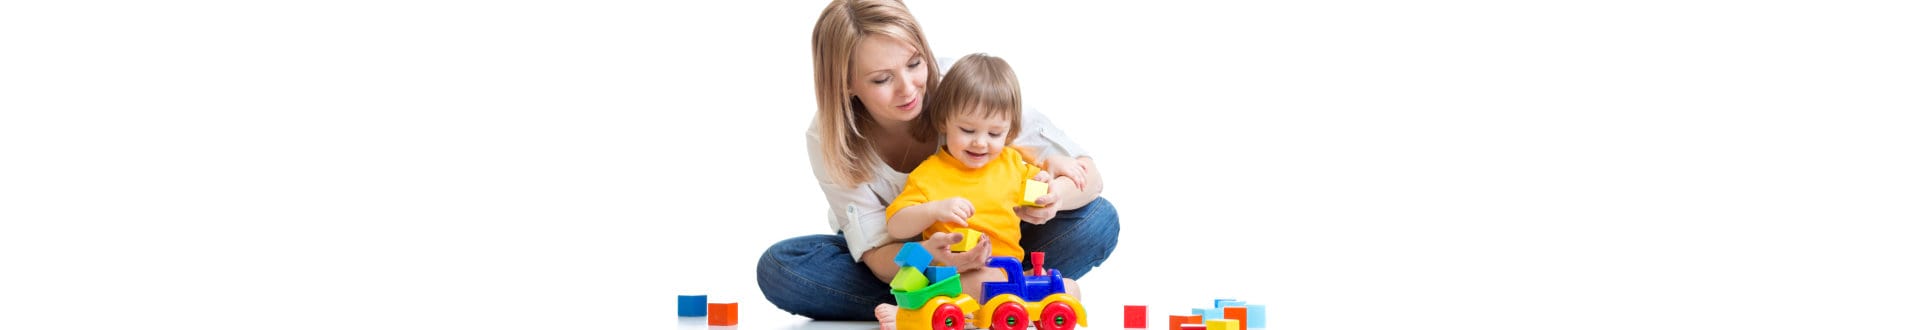 woman with little child playing toys